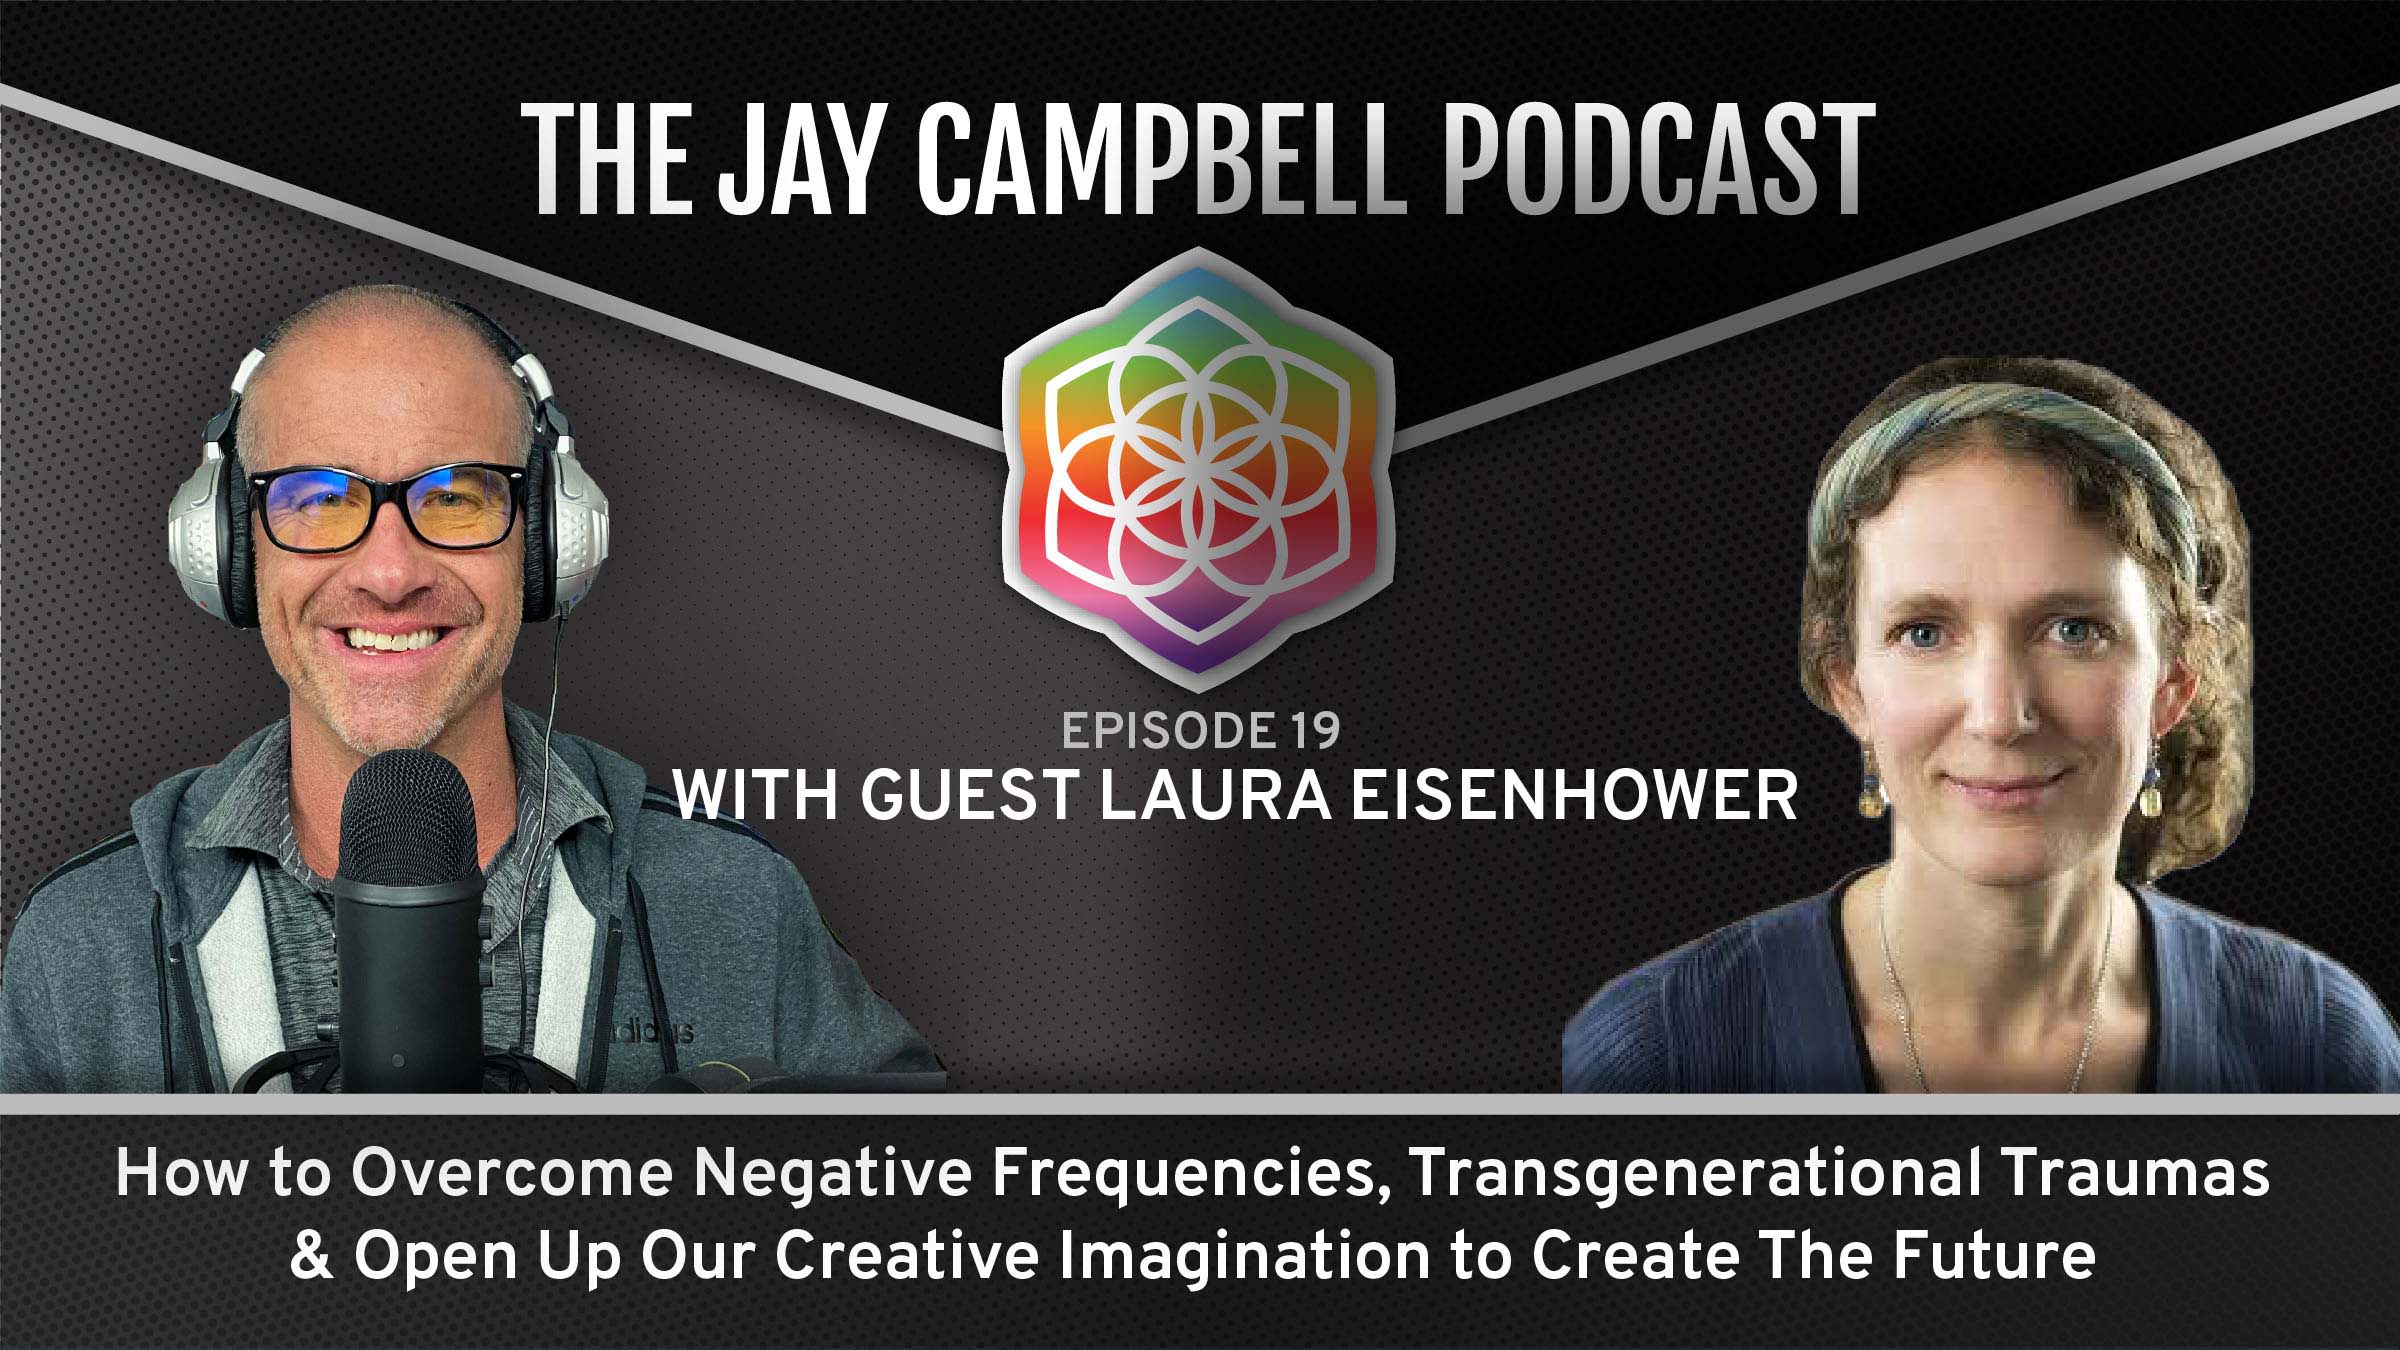 How to Overcome Negative Frequencies, Transgenerational Traumas & Open Up Our Creative Imagination to Create The Future w/Laura Eisenhower